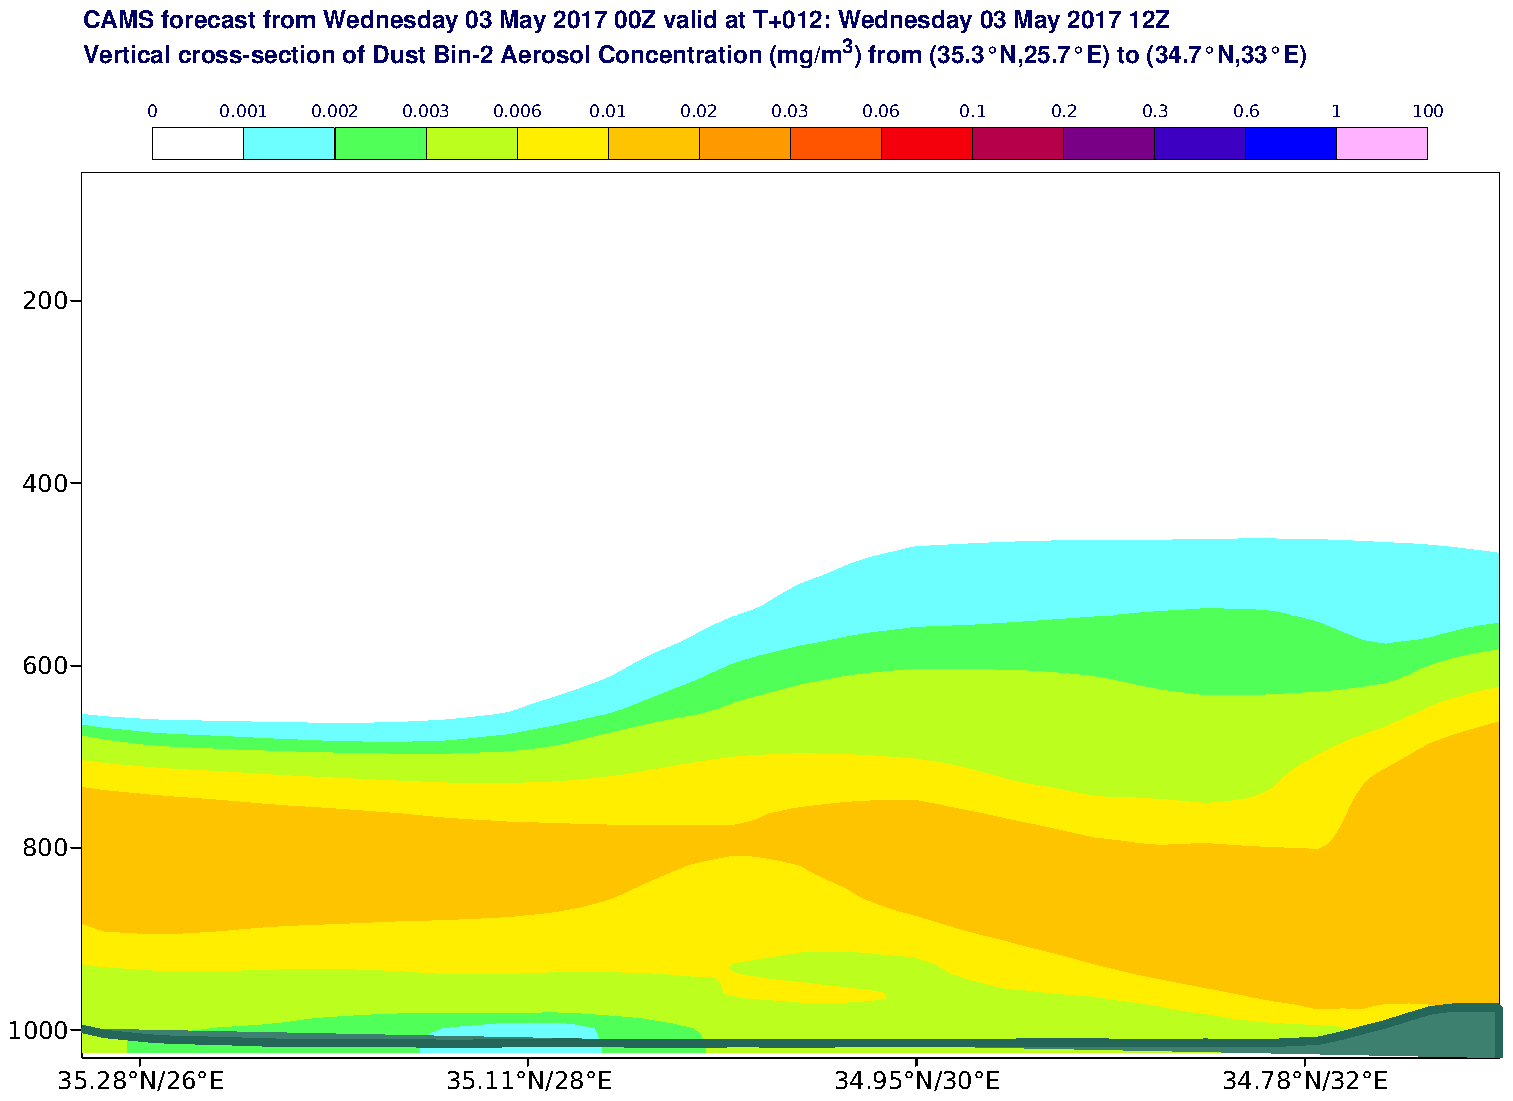 Vertical cross-section of Dust Bin-2 Aerosol Concentration (mg/m3) valid at T12 - 2017-05-03 12:00